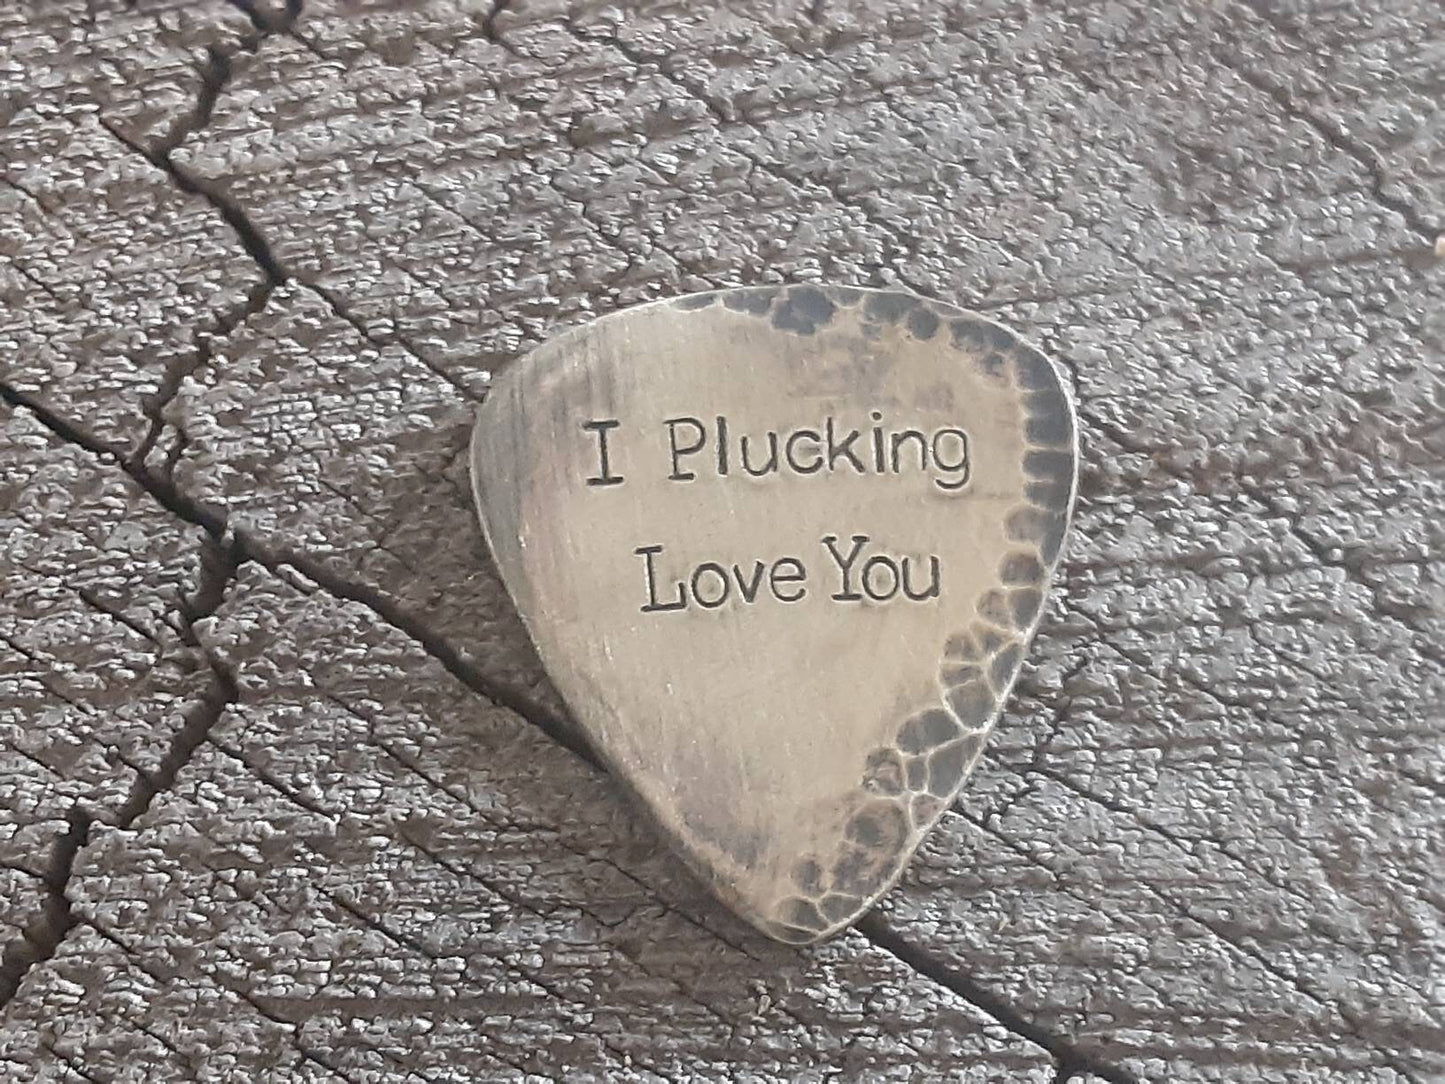 Distressed brass guitar pick for rustic styling